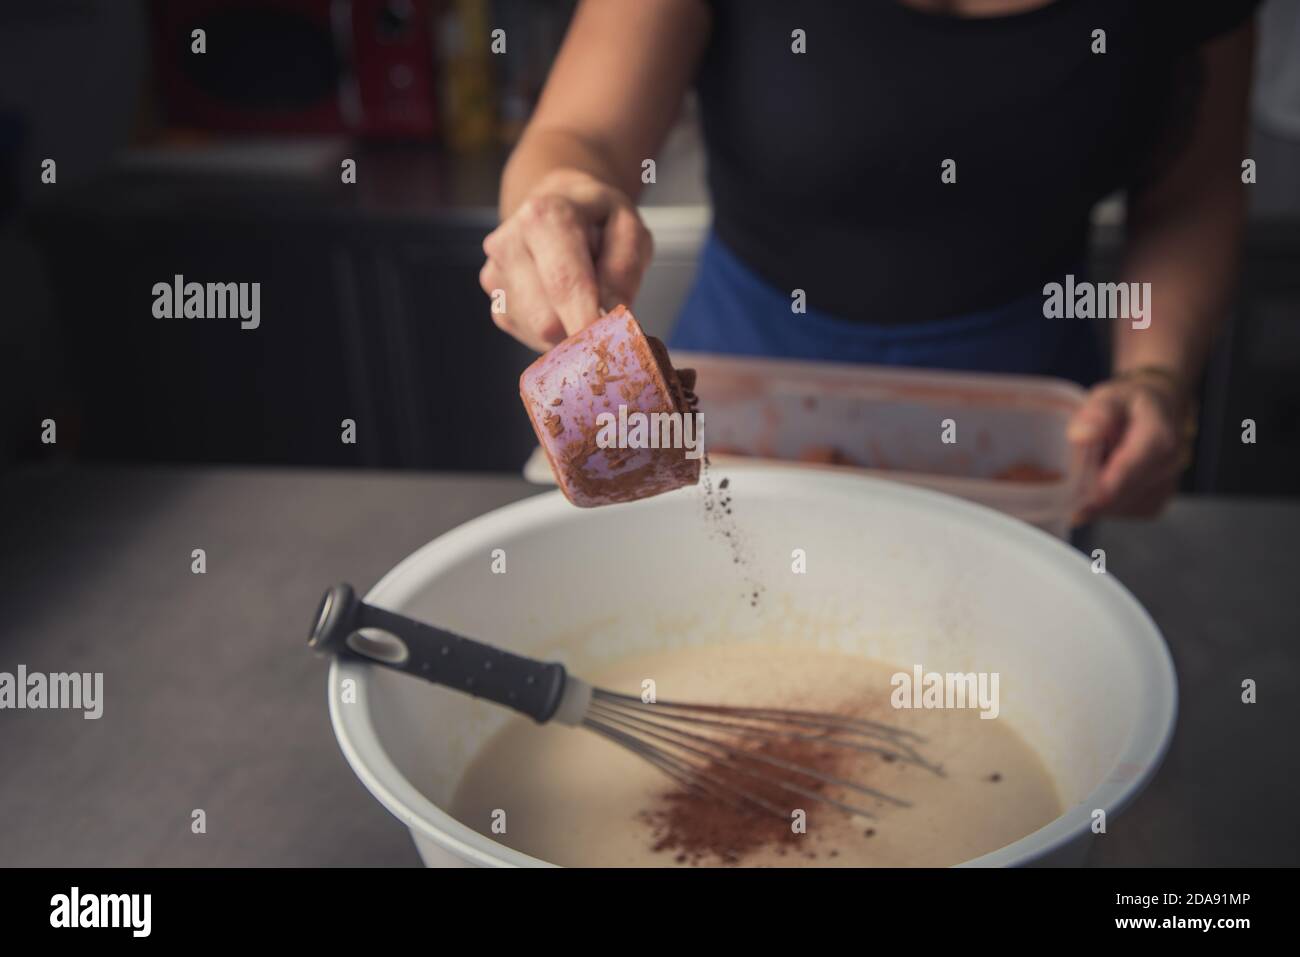 young woman making non-industrial homemade cake in small kitchen Stock Photo